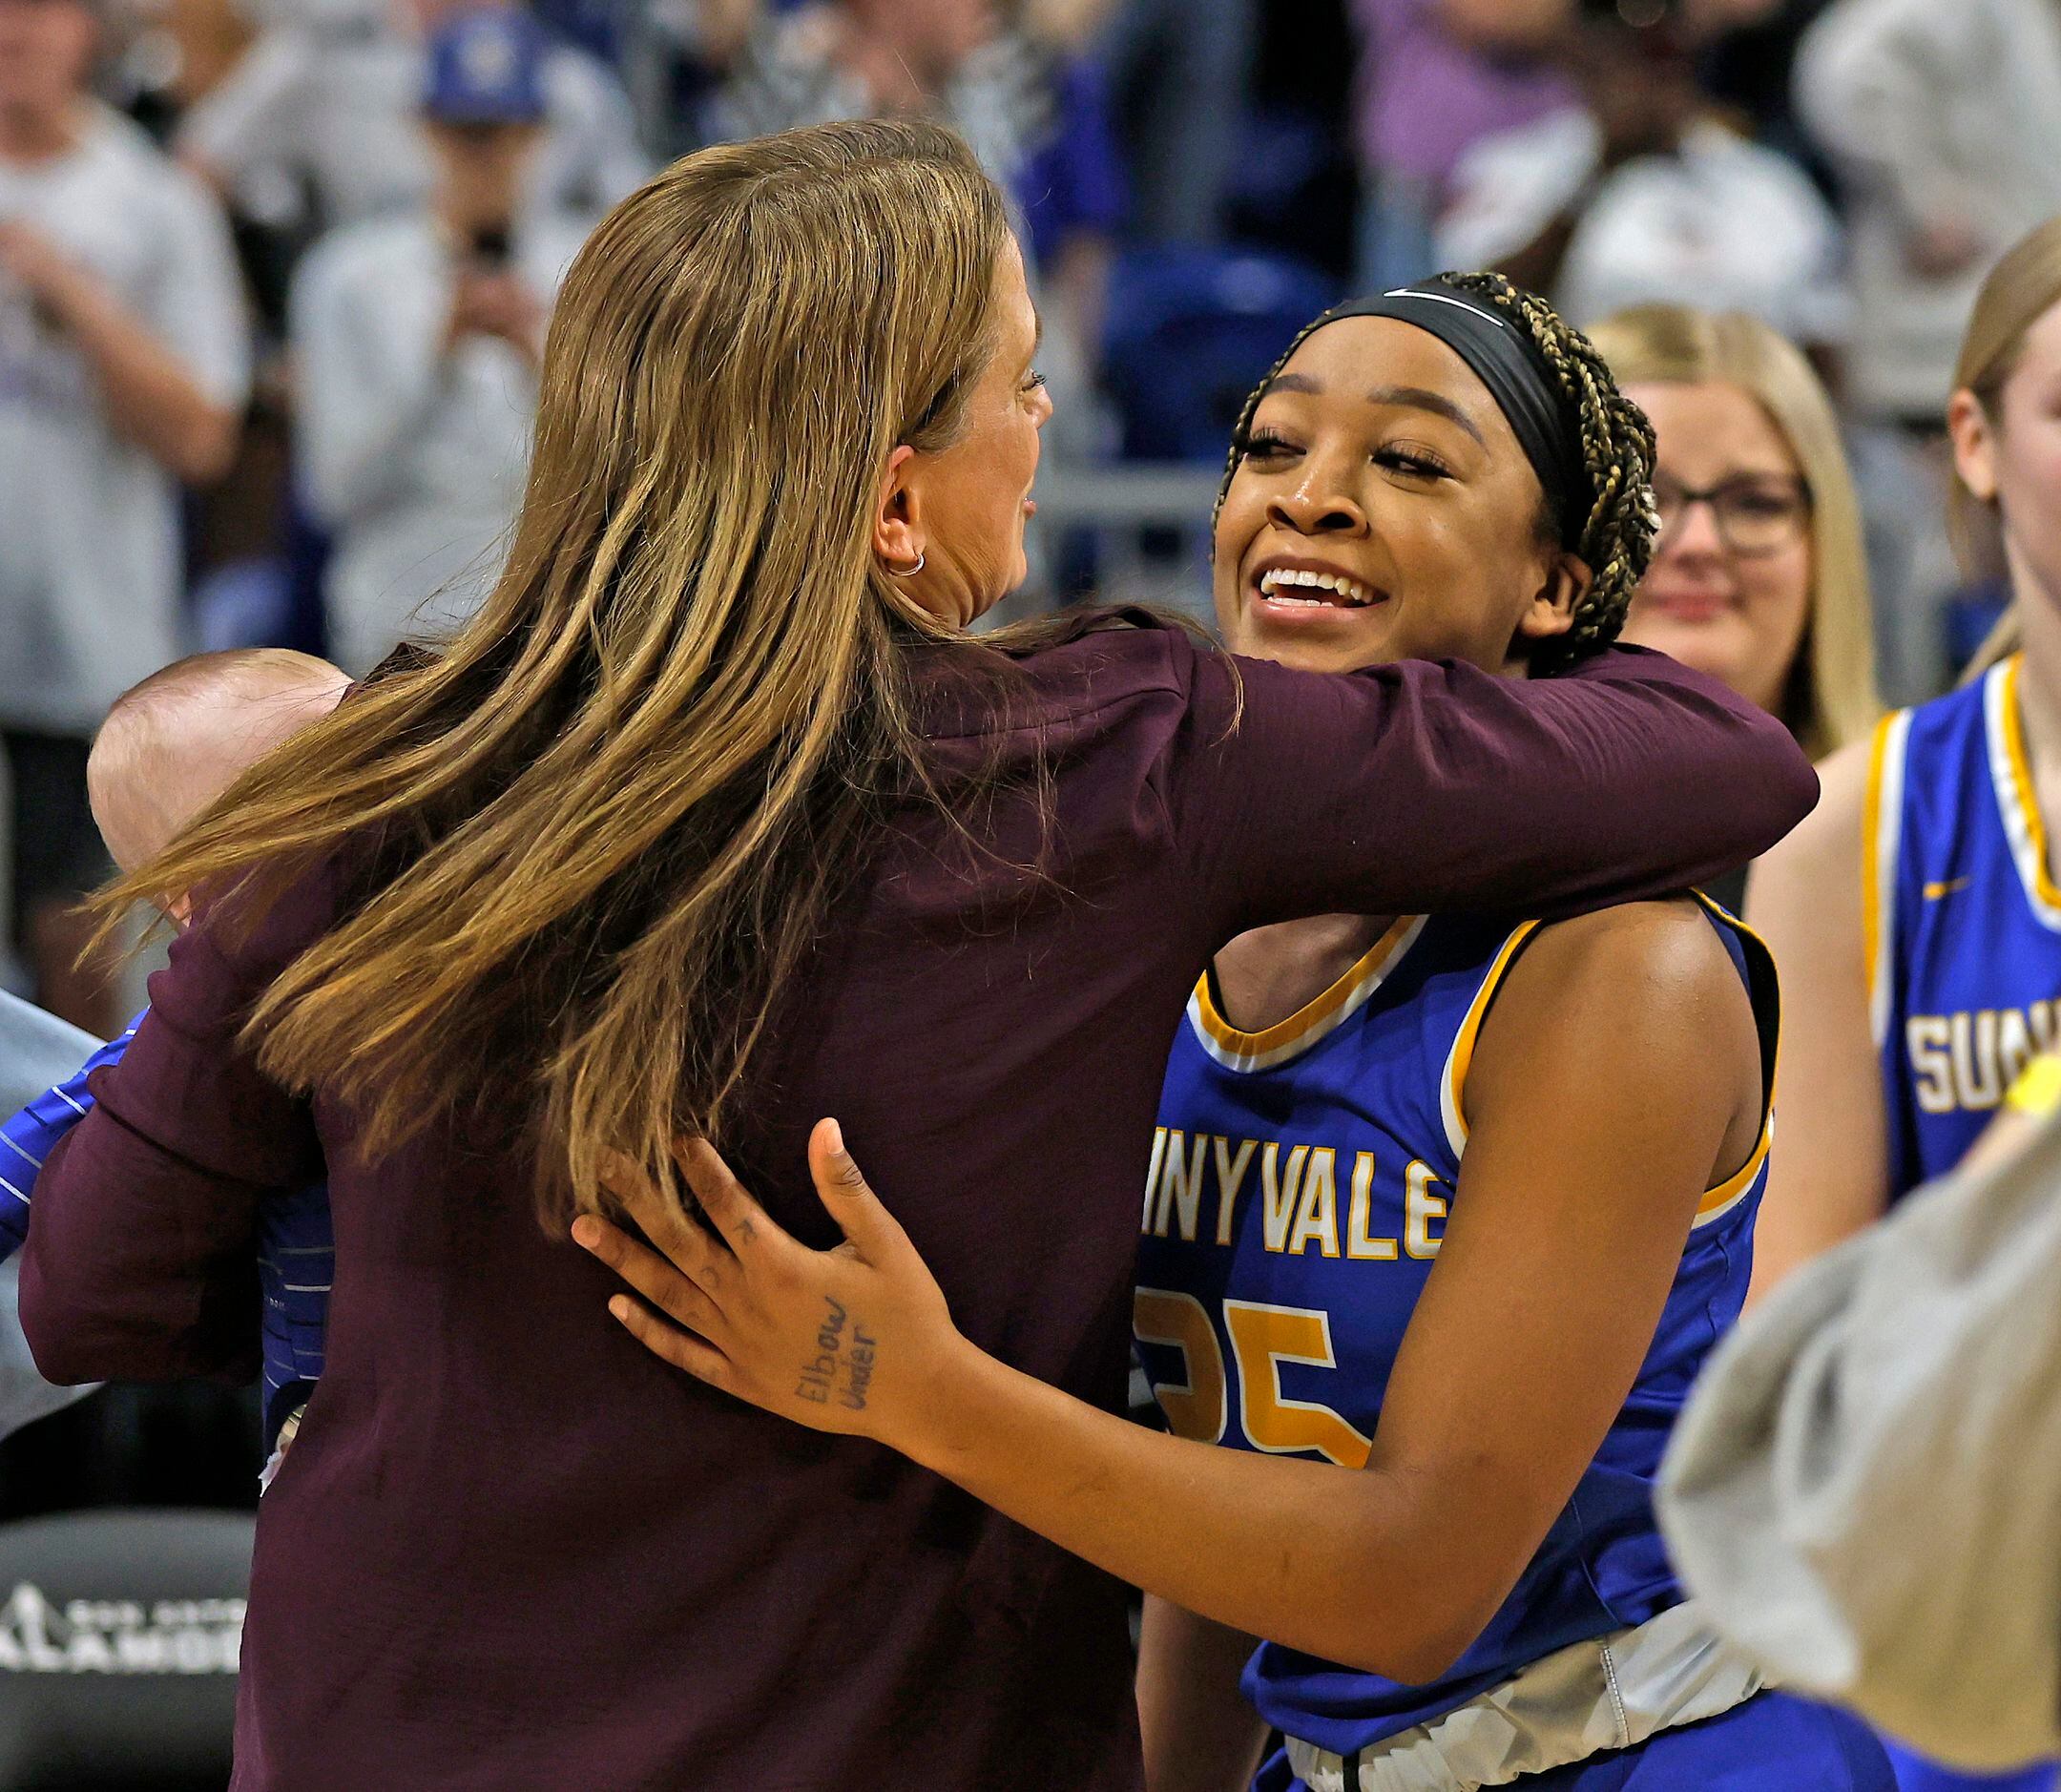 Photos: One game left! Micah Russell leads Sunnyvale to 4A title ...